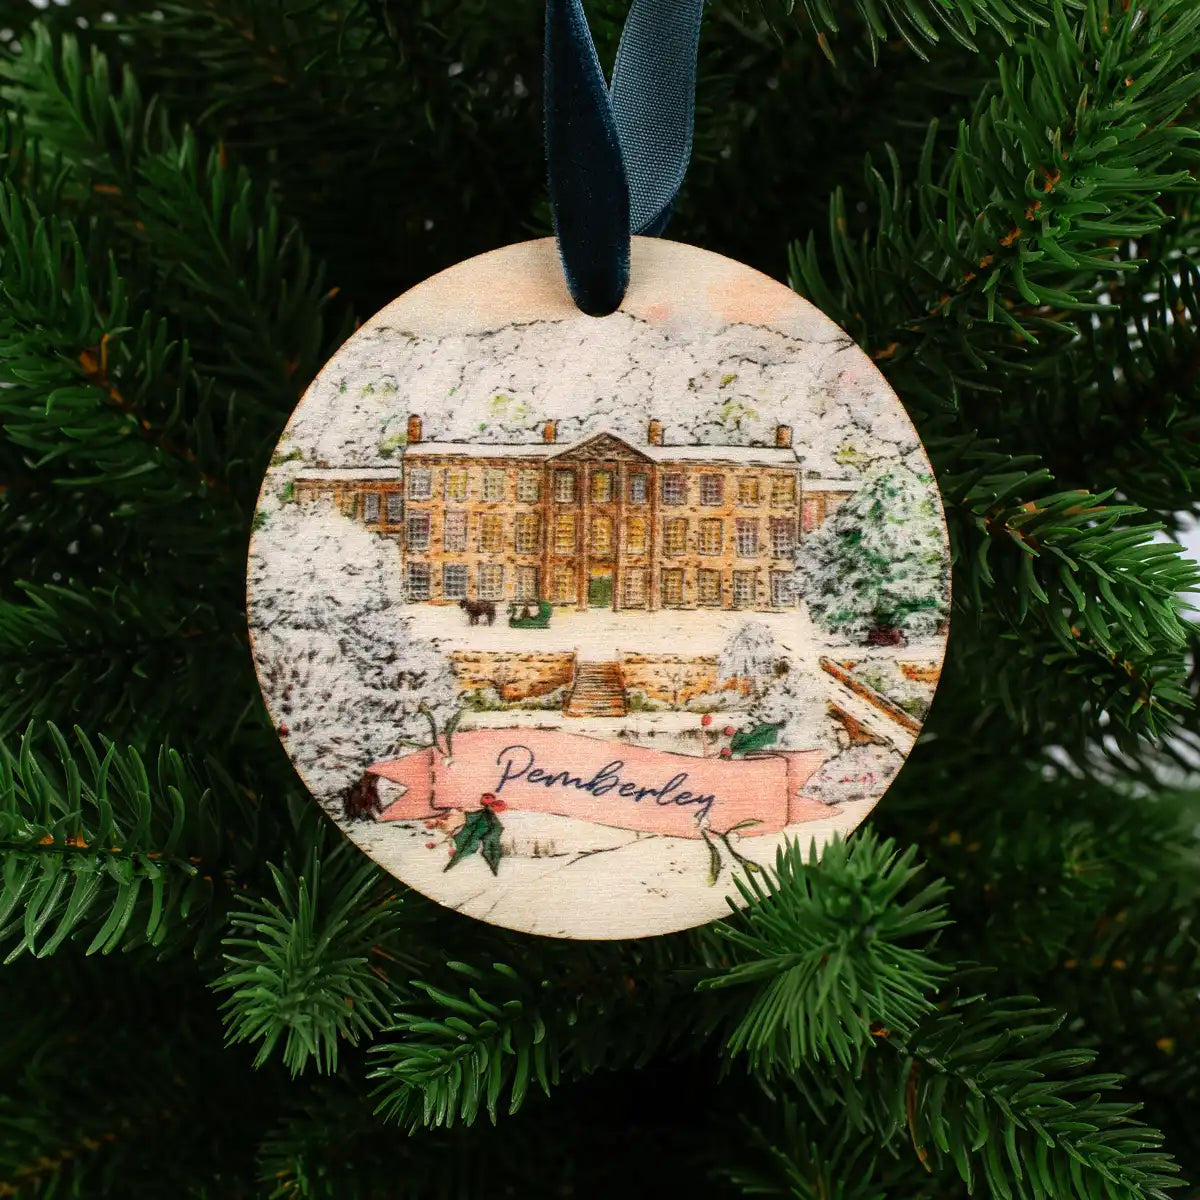 With "Seasons Greetings" delicately written on the back, this charming decoration certainly adds a sprinkling of Jane Austen flare to your Christmas tree this winter. 